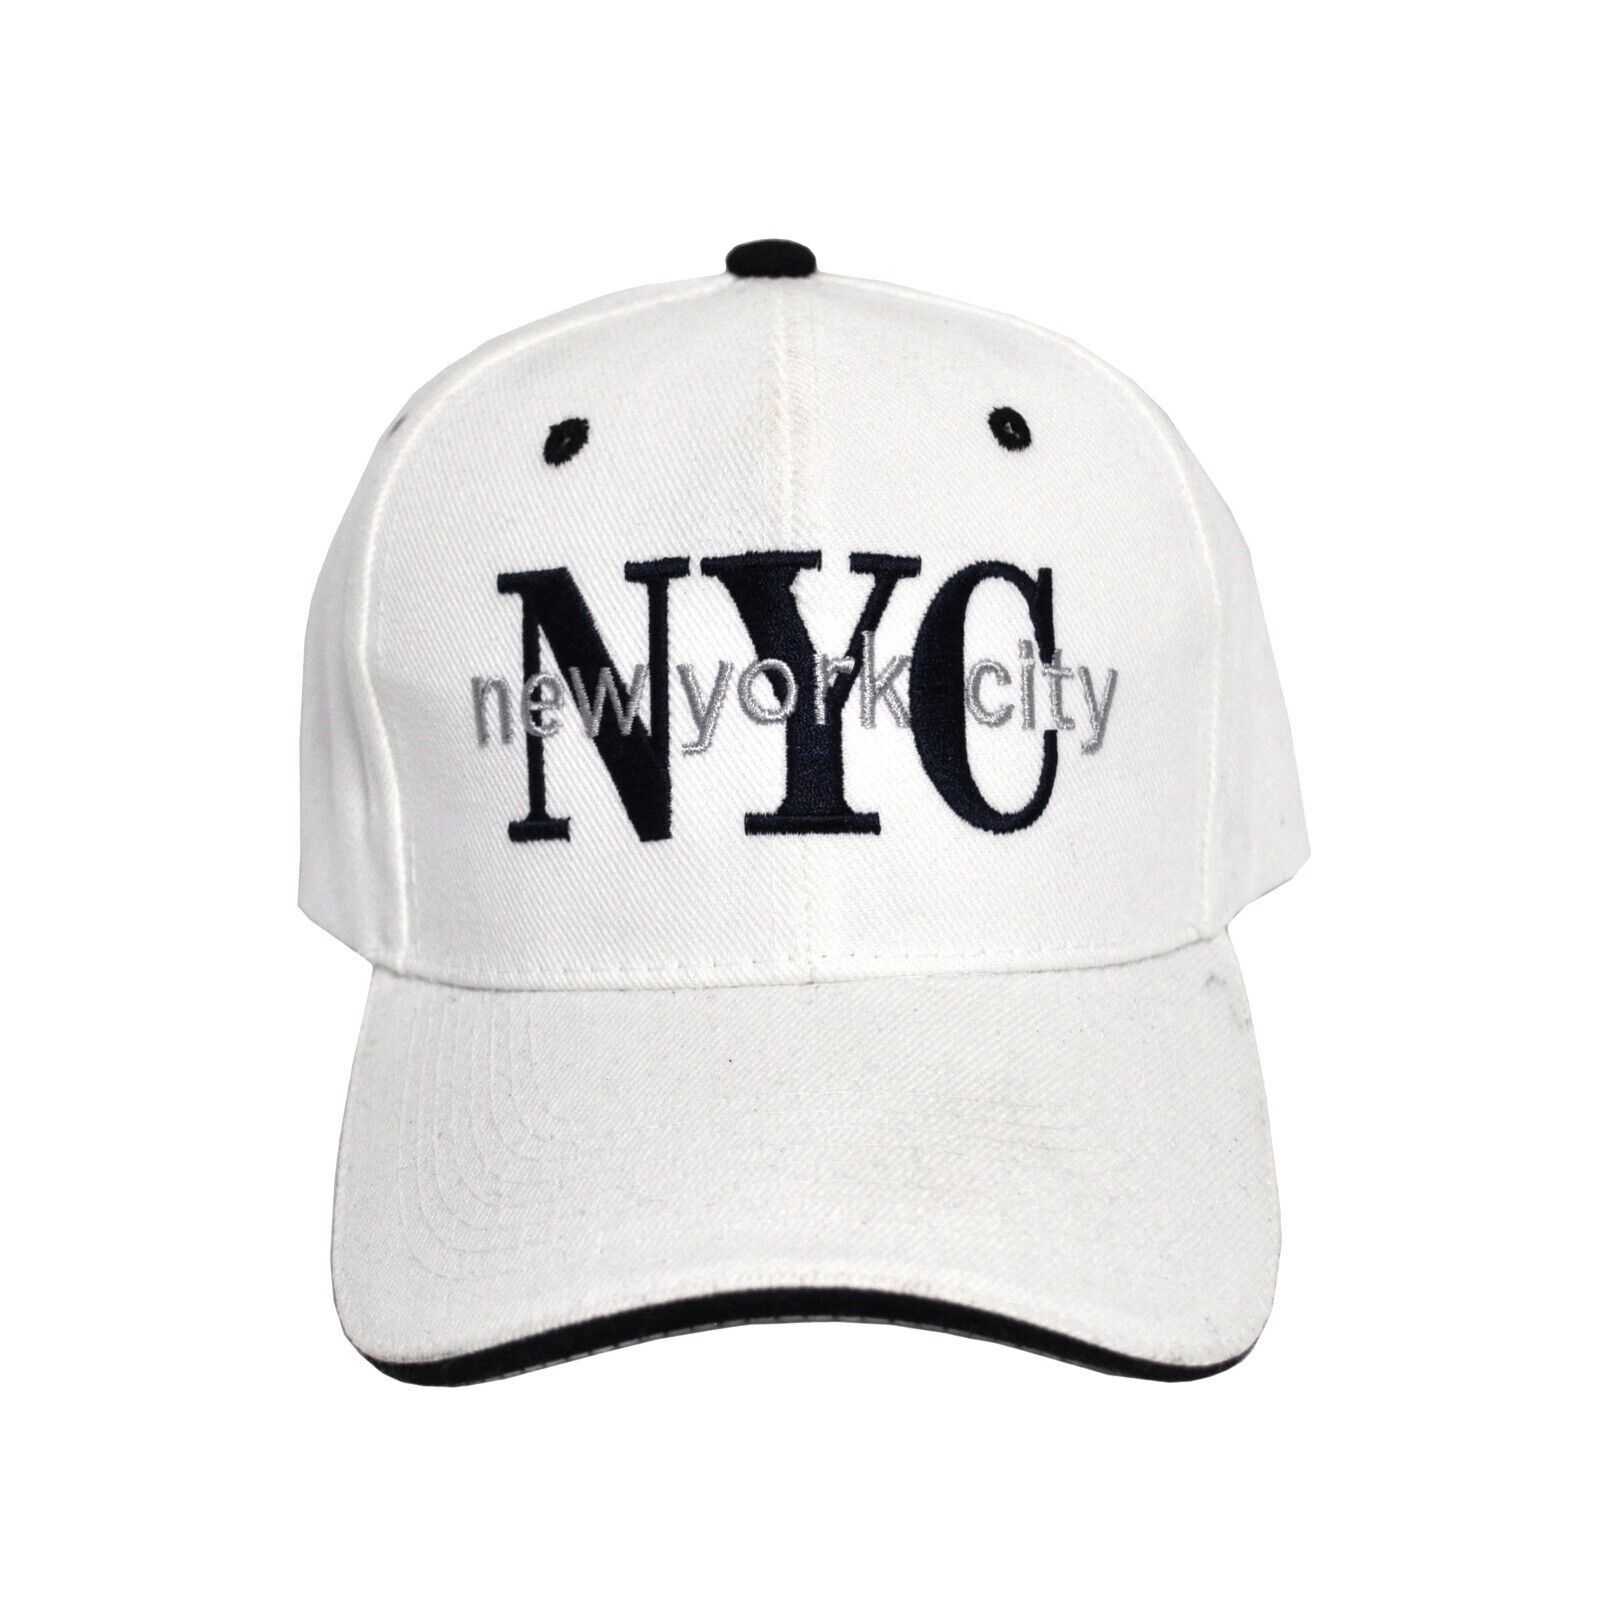 Primary image for New York City Adjustable Baseball Cap